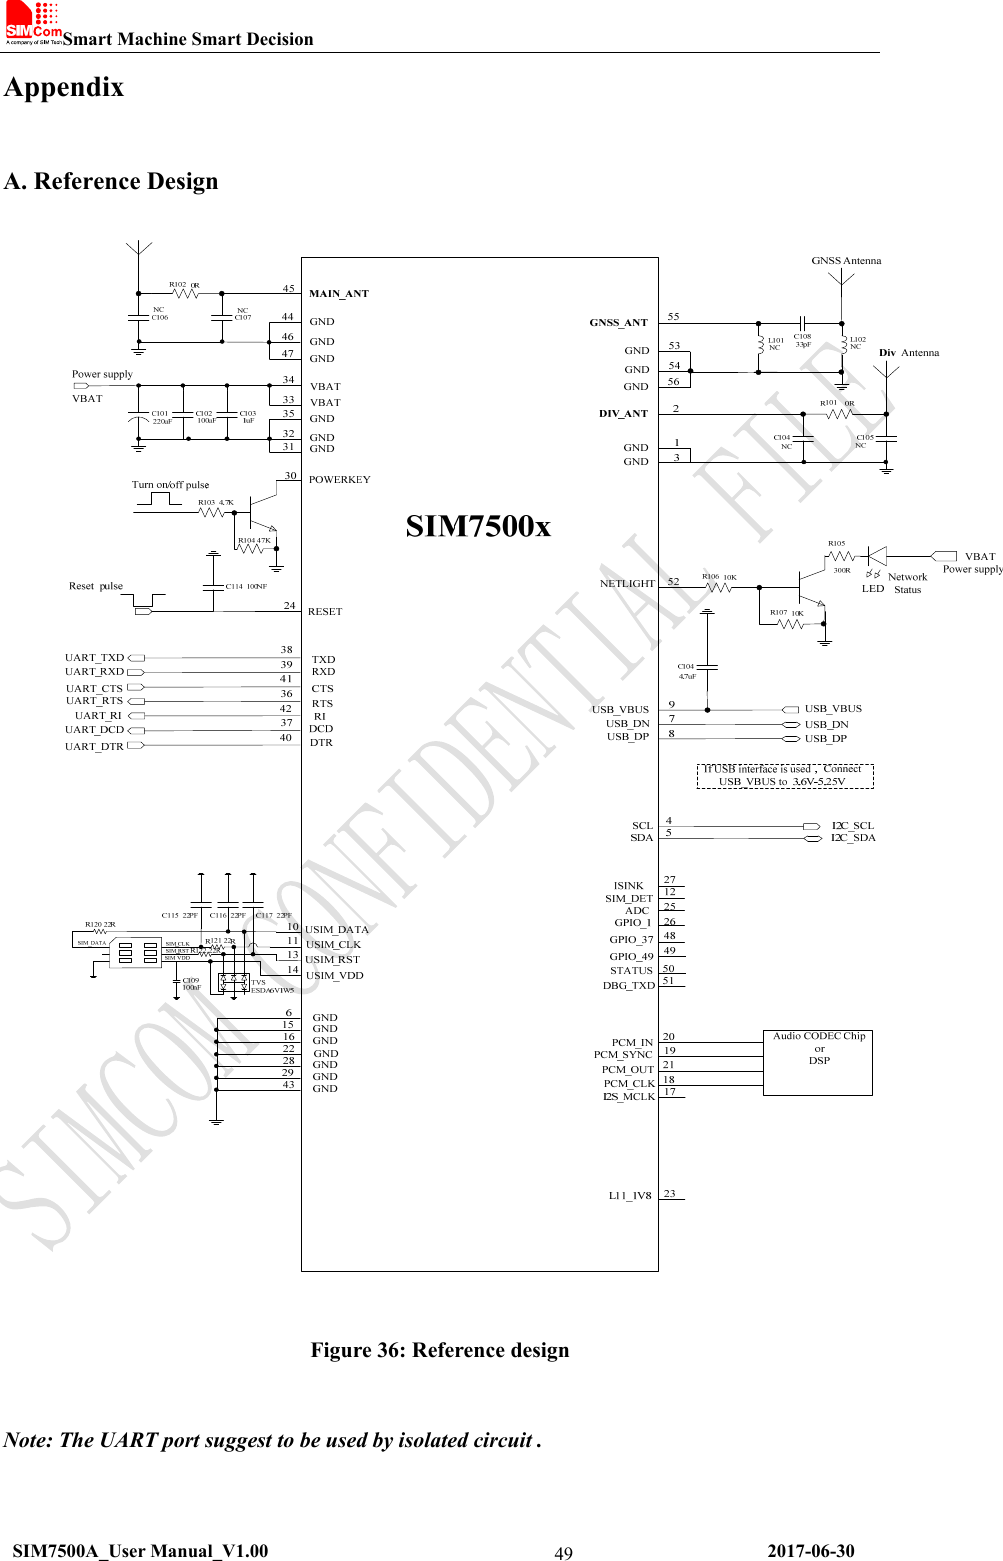 Smart Machine Smart Decision   SIM7500A_User Manual_V1.00                                                      2017-06-30 49Appendix A. Reference Design  Figure 36: Reference design  Note: The UART port suggest to be used by isolated circuit .   